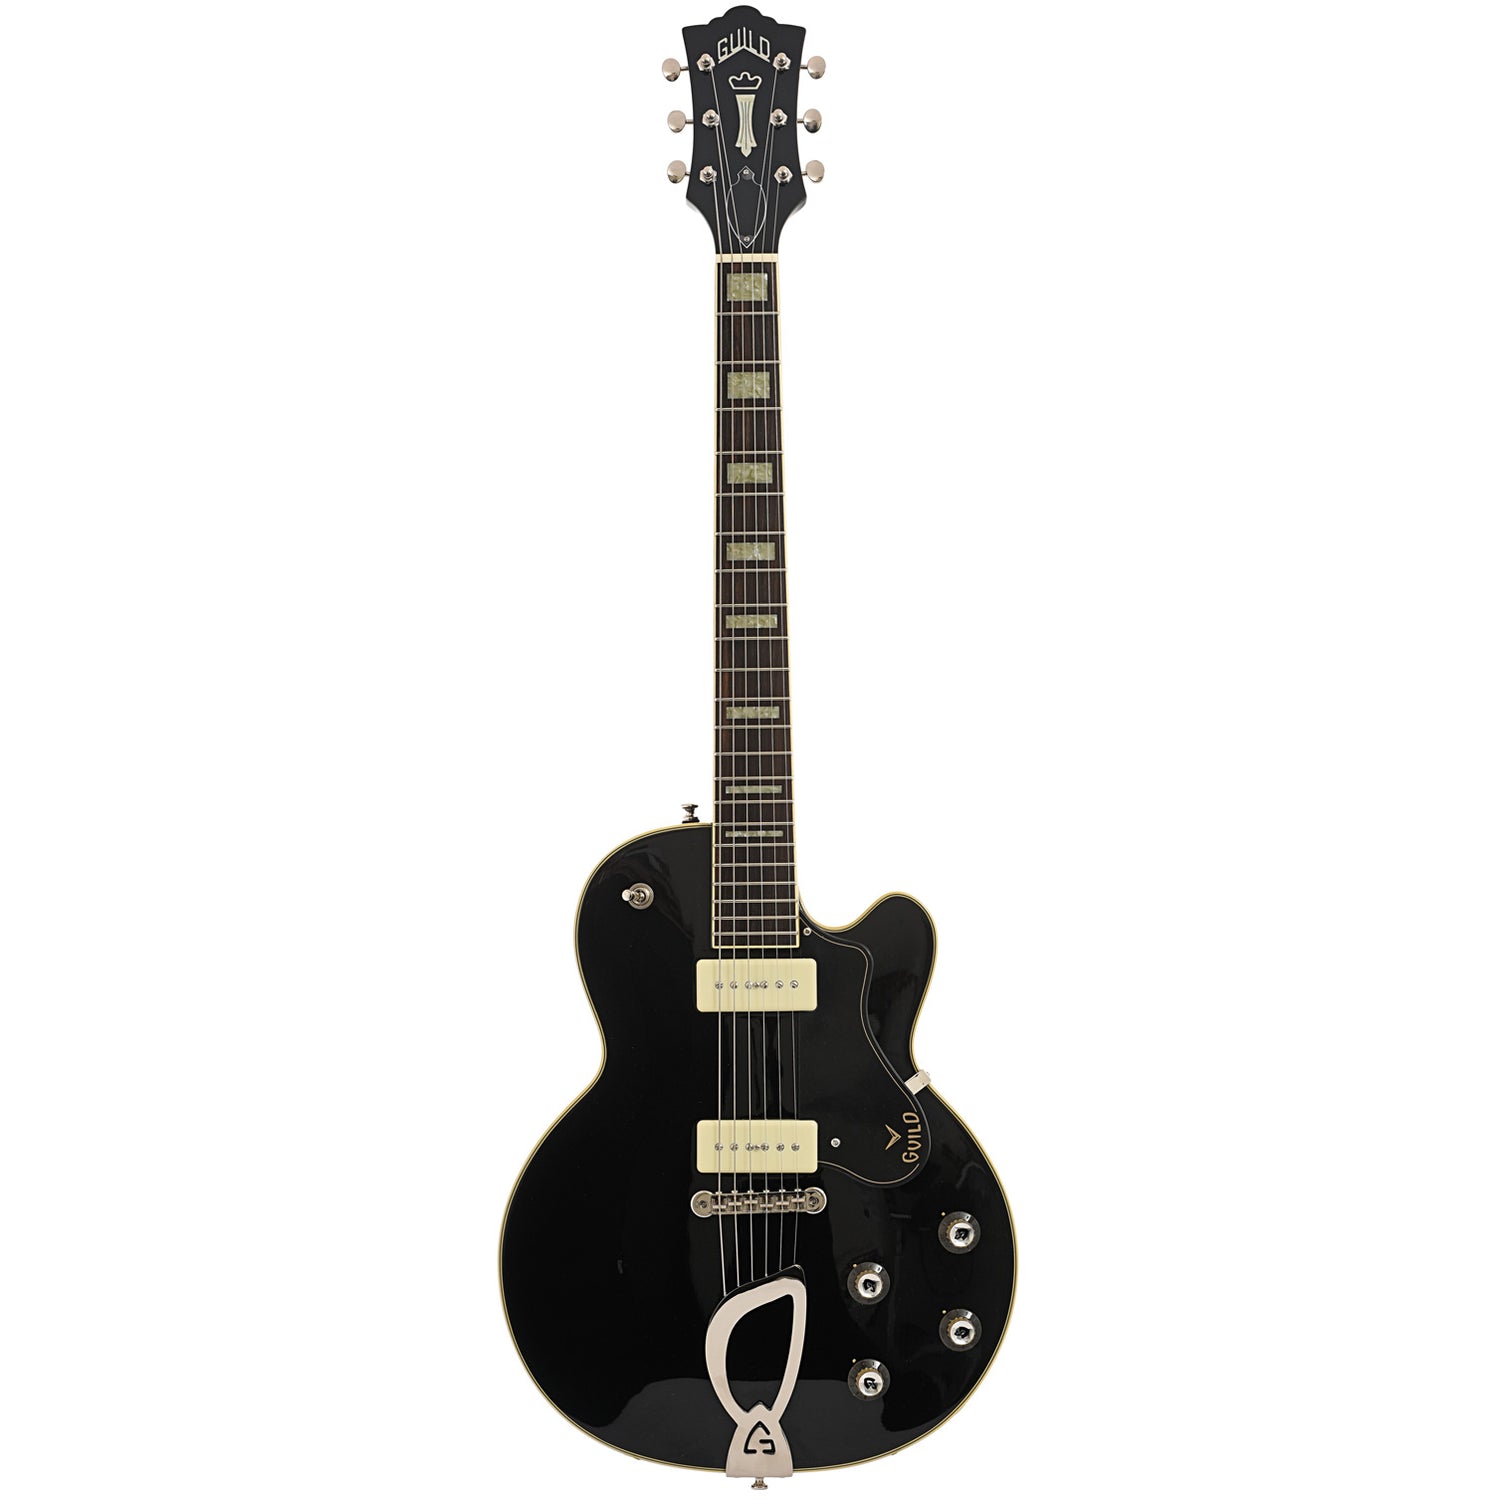 Full front of Guild Newark St. Collection M-75 Aristocrat Hollow Body Archtop Guitar, Limited Edition Black Finish